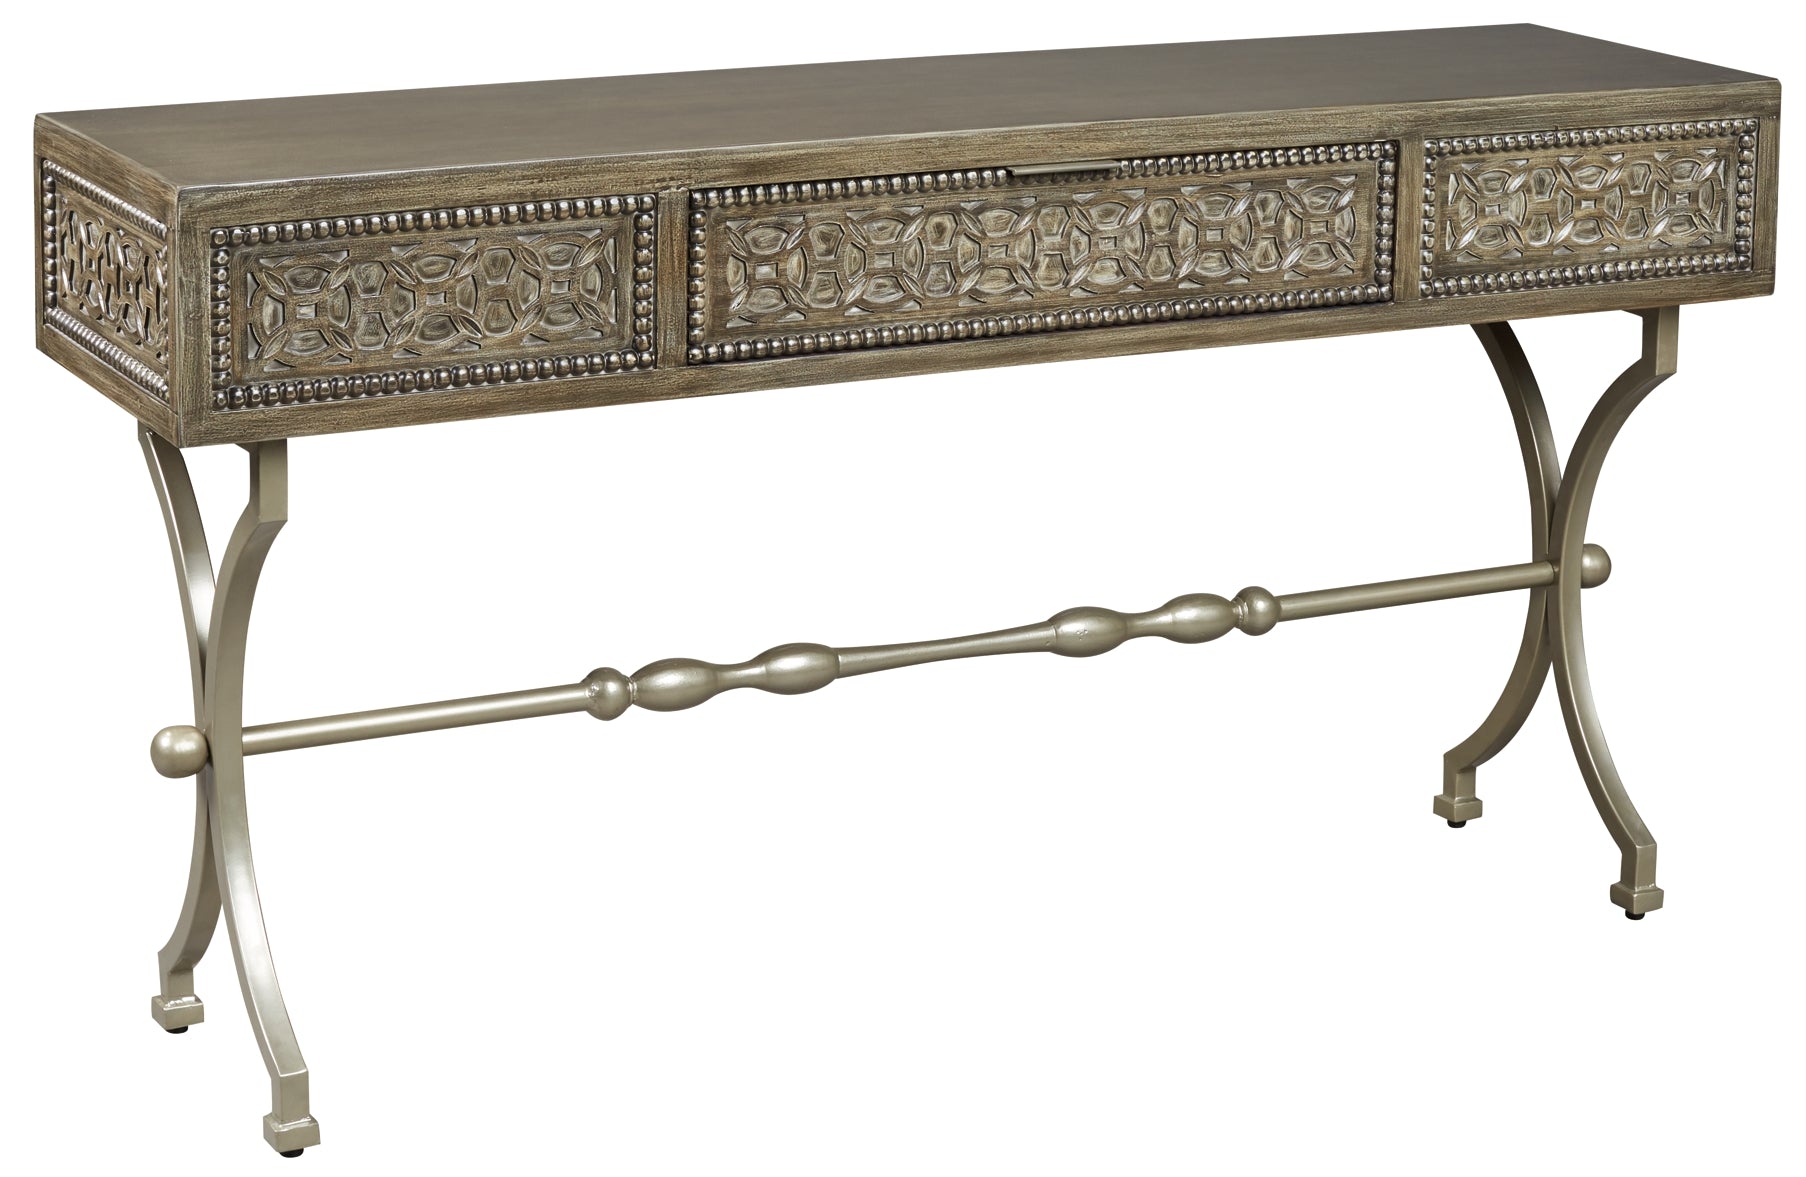 Quinnland Console Sofa Table at Walker Mattress and Furniture Locations in Cedar Park and Belton TX.